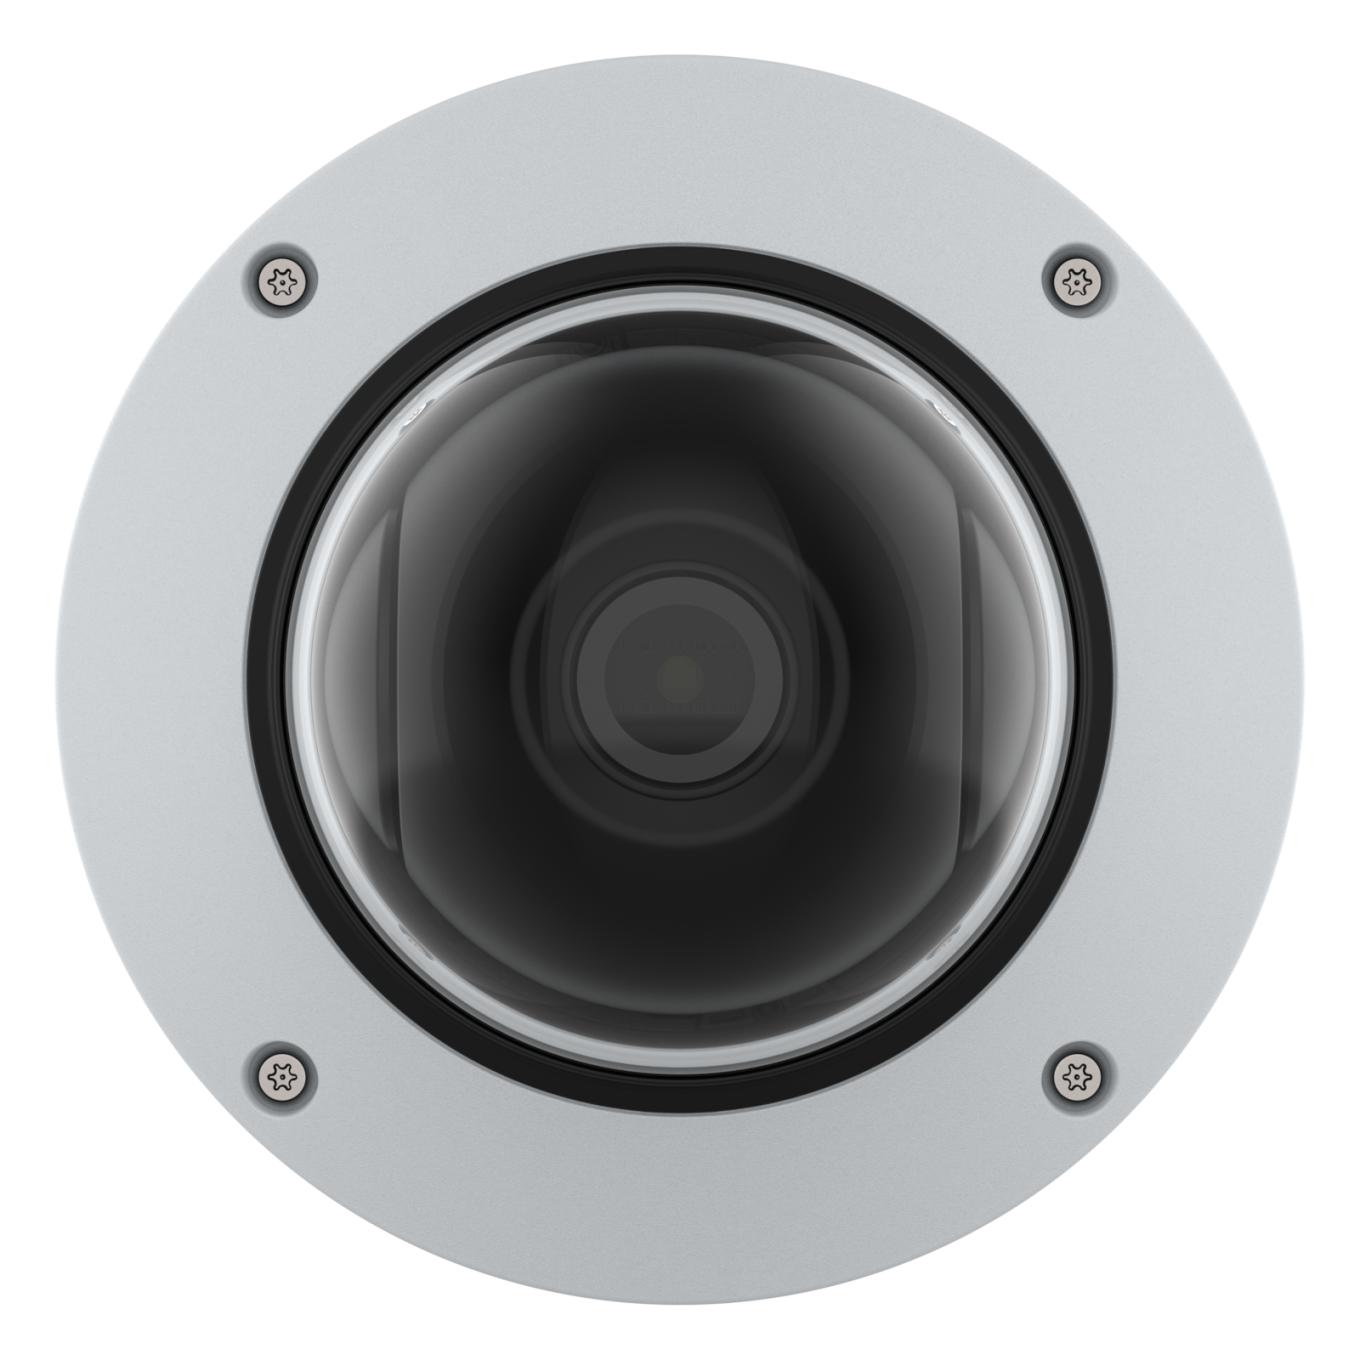 AXIS Q3626-VE Dome Camera front viewed